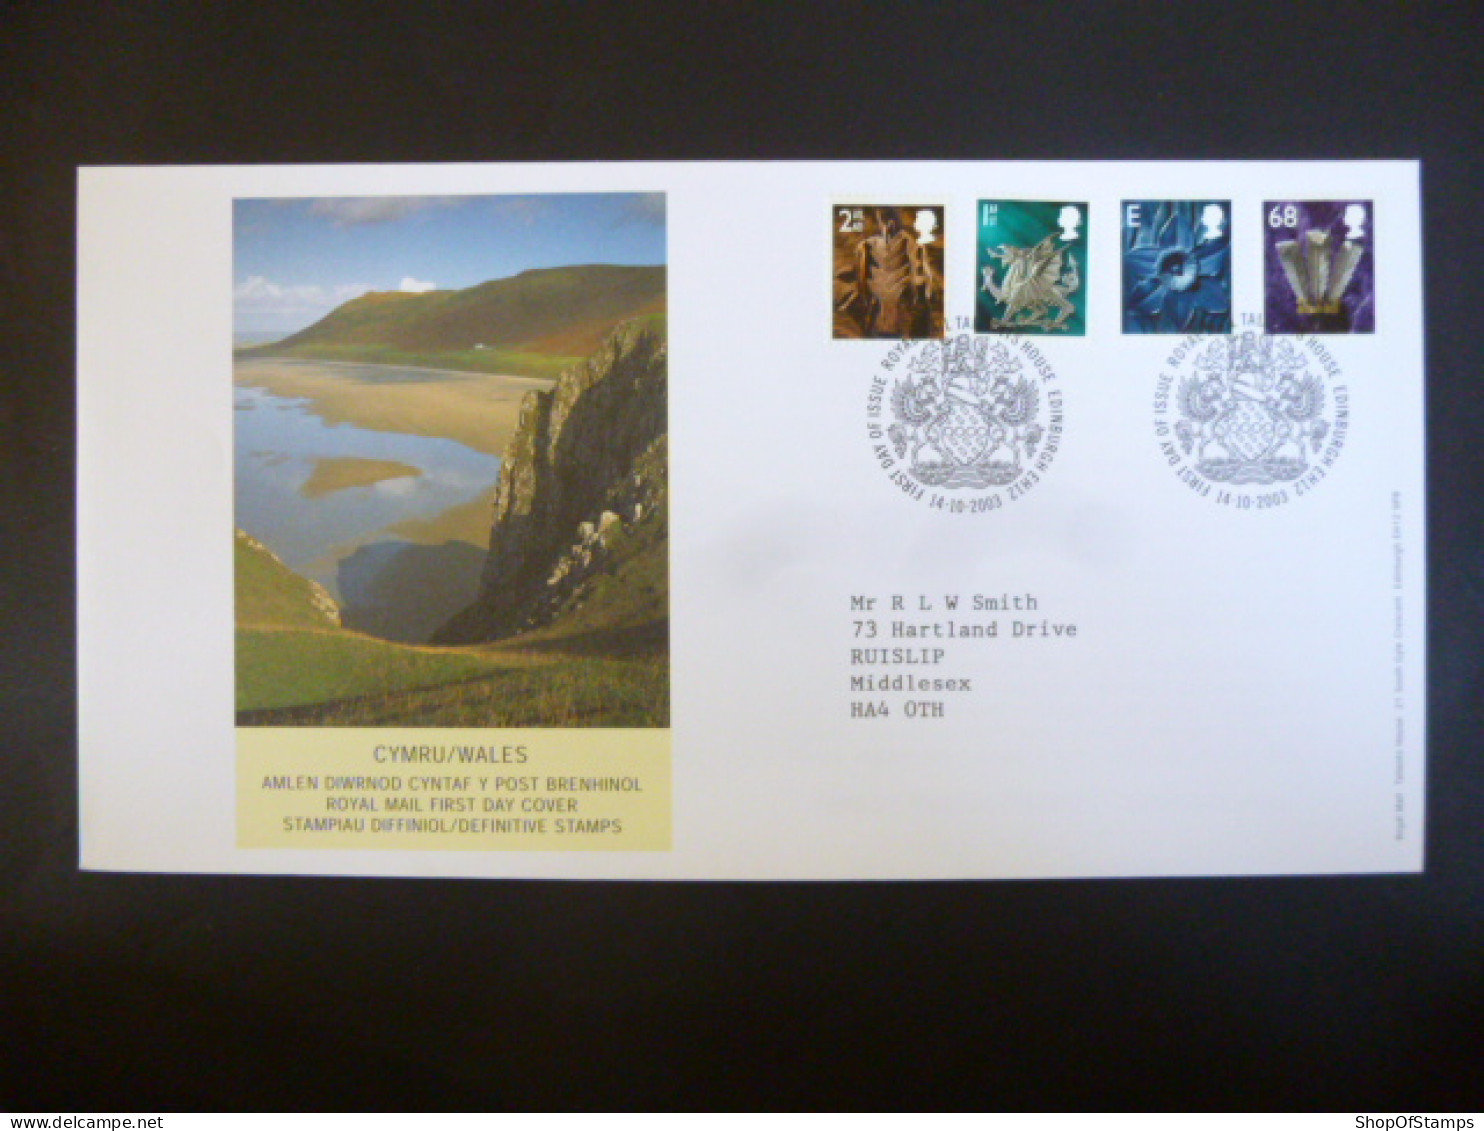 GREAT BRITAIN SG W98-100 & W106 FDC ROYAL MAIL TALENT HOUSE EDINBURGH - Unclassified